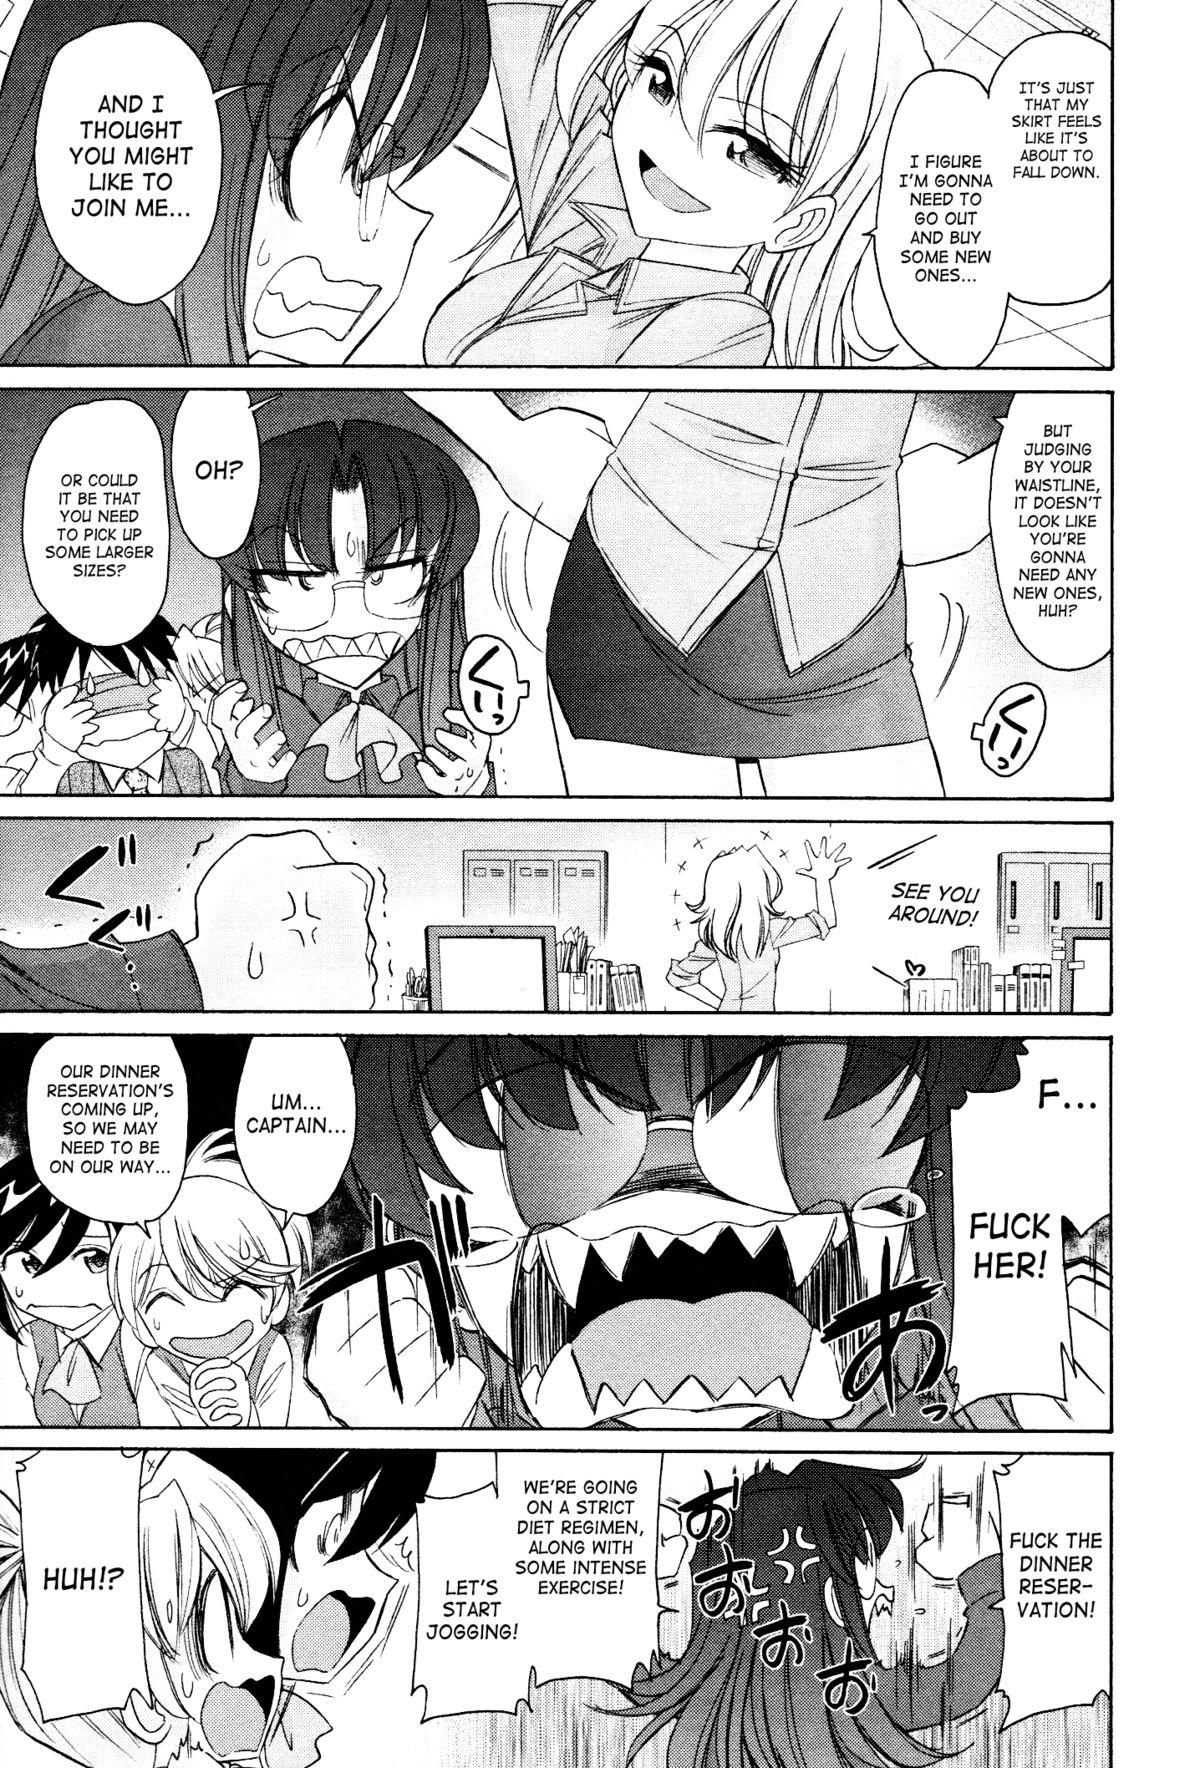 Groupsex Cheers! 12 Ch. 94-97 Ikillitts - Page 12